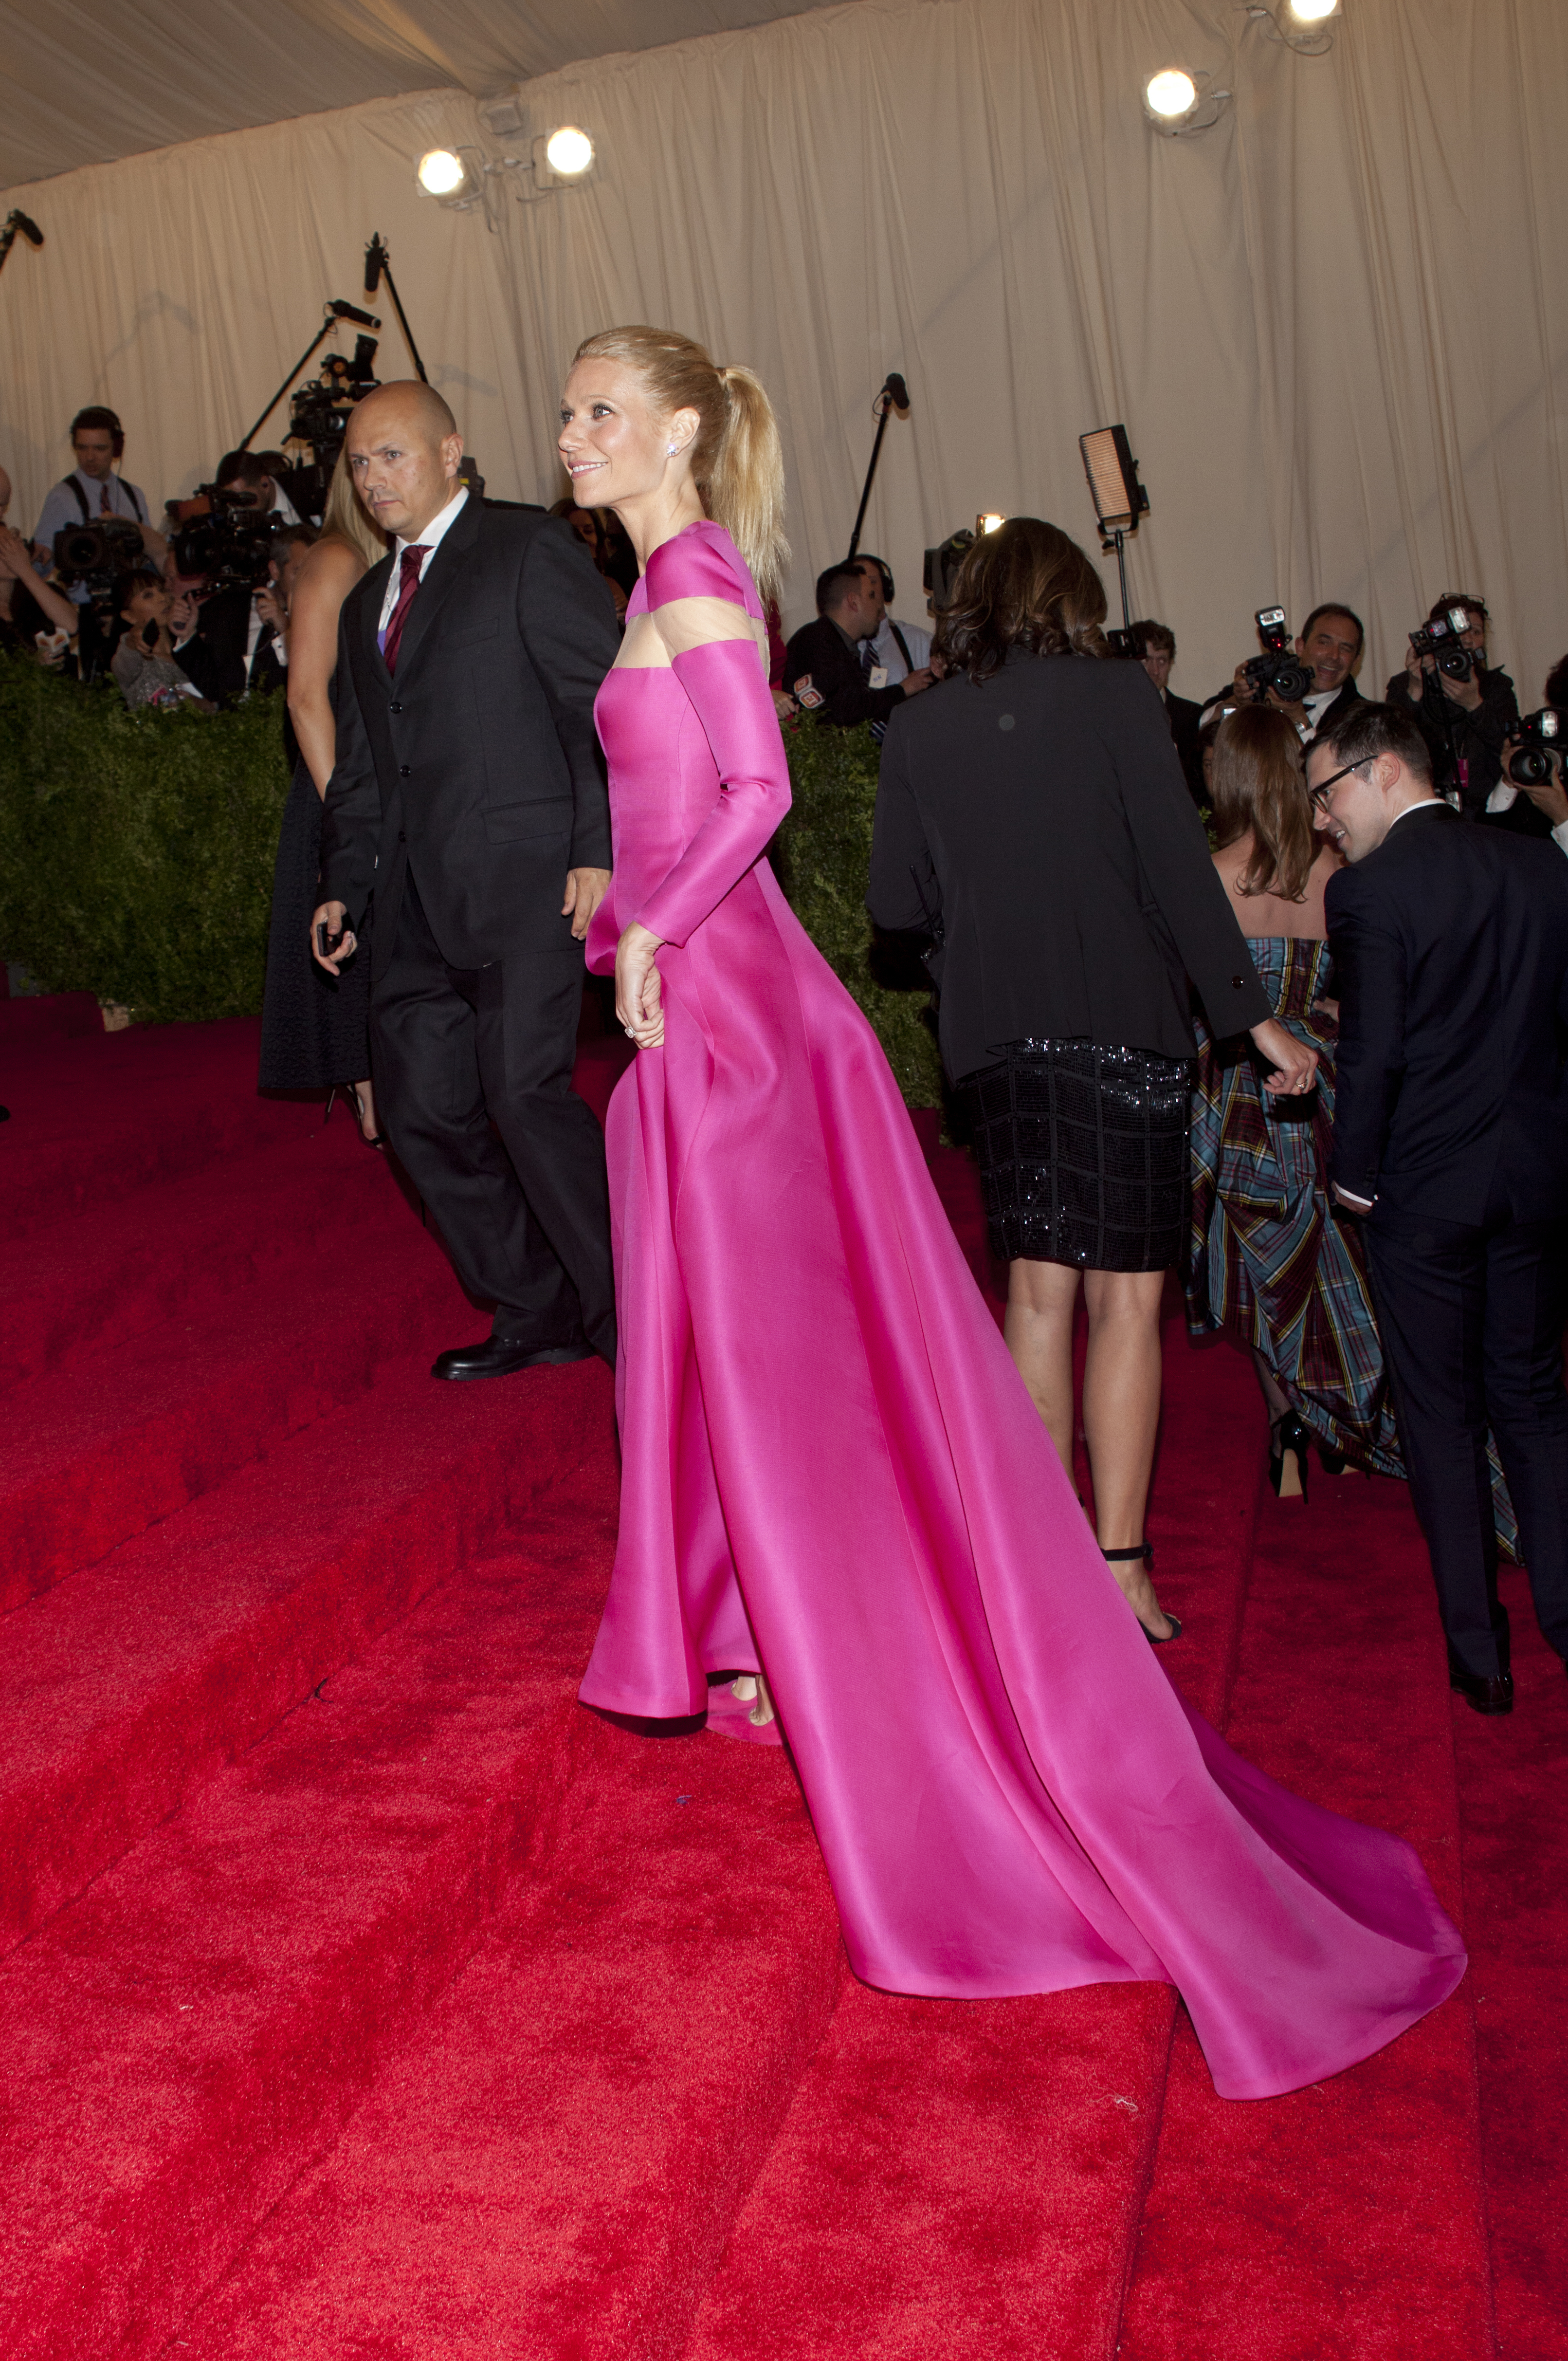 Gwyneth Paltrow at the Met Gala dressed for the 'PUNK: Chaos to Couture' theme in 2013 in New York | Source: Getty Images